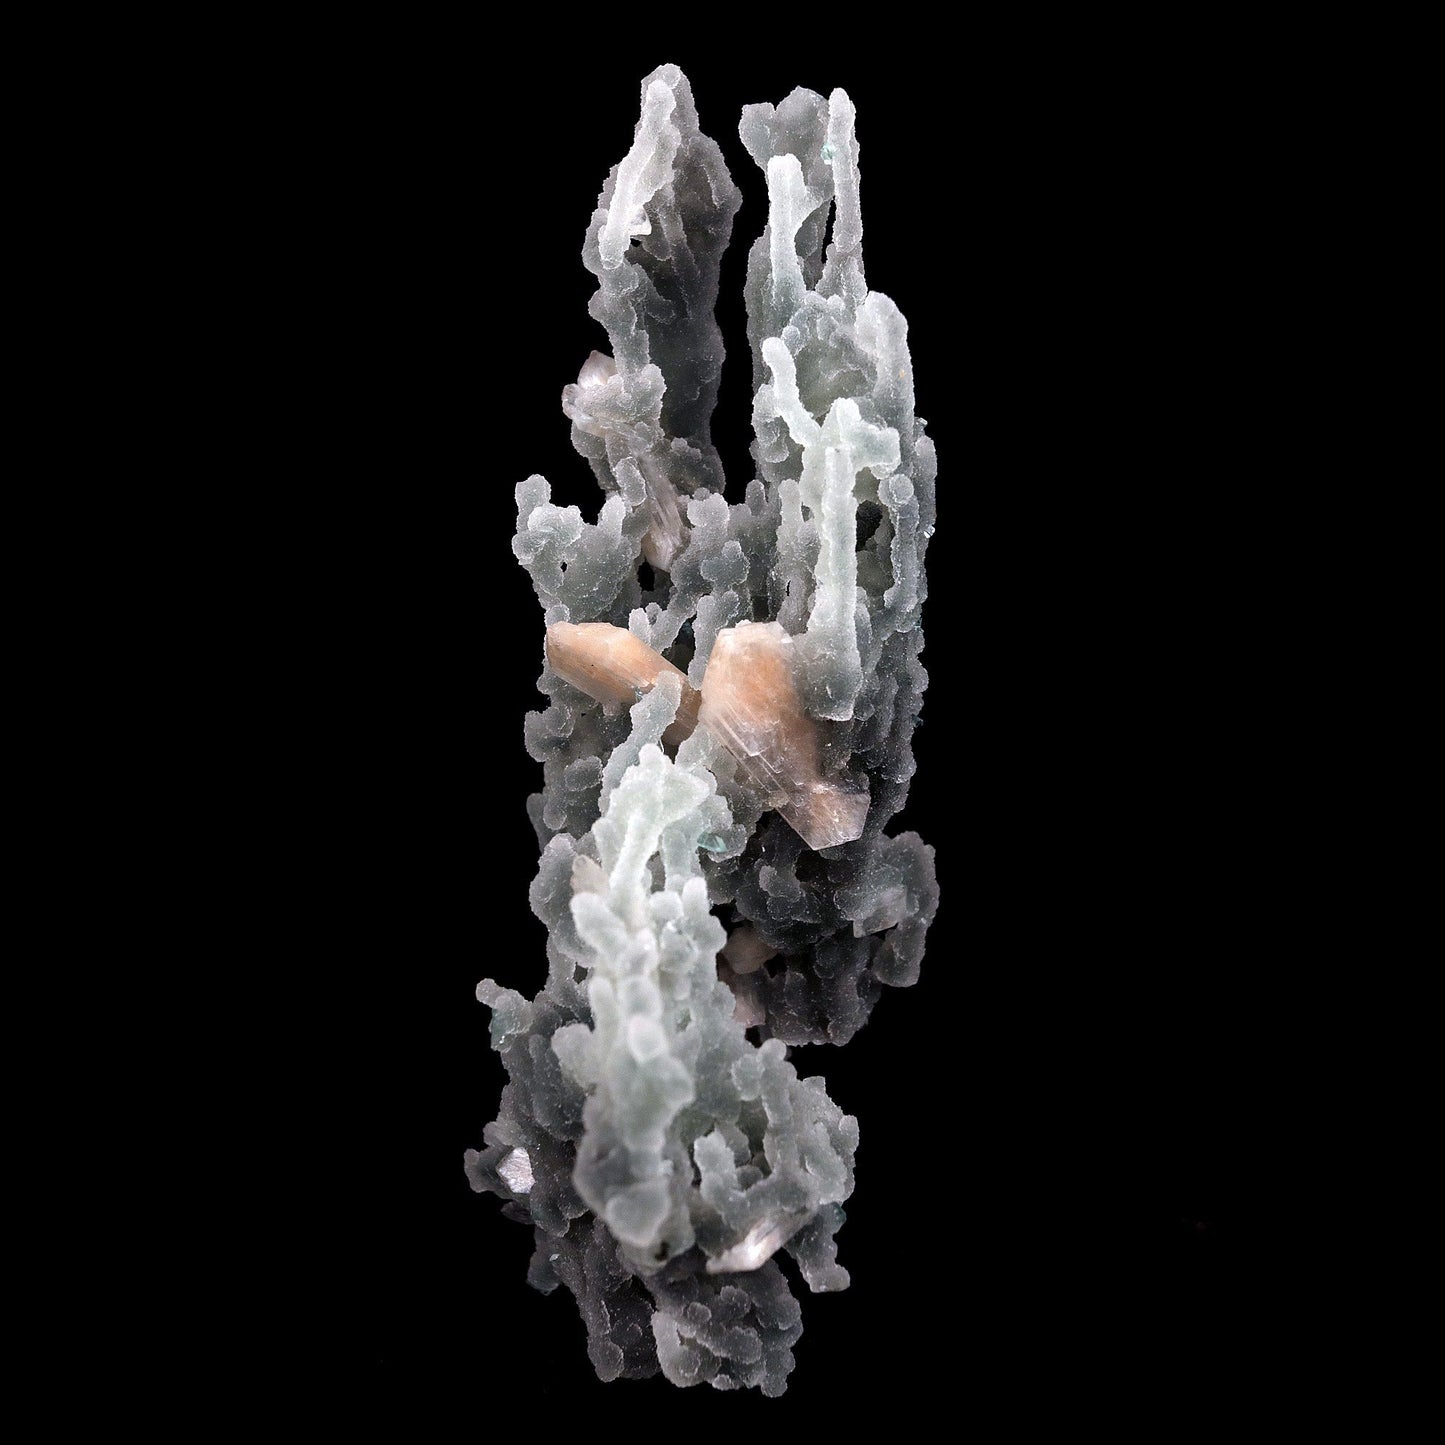 Pink Stilbite Crystal on Chalcedony Sea Coral Formation Natural Minera…  https://www.superbminerals.us/products/pink-stilbite-crystal-on-chalcedony-sea-coral-formation-natural-mineral-specimen-b-4457  Features:Unusual Stilbite from India, exhibiting a transparent, beige crystal with a pearly sheen sitting atop an off-white stalactitic Chalcedony cluster in an aesthetically pleasing display. A one-of-a-kind item in superb condition. Primary Mineral(s): StilbiteSecondary Mineral(s)